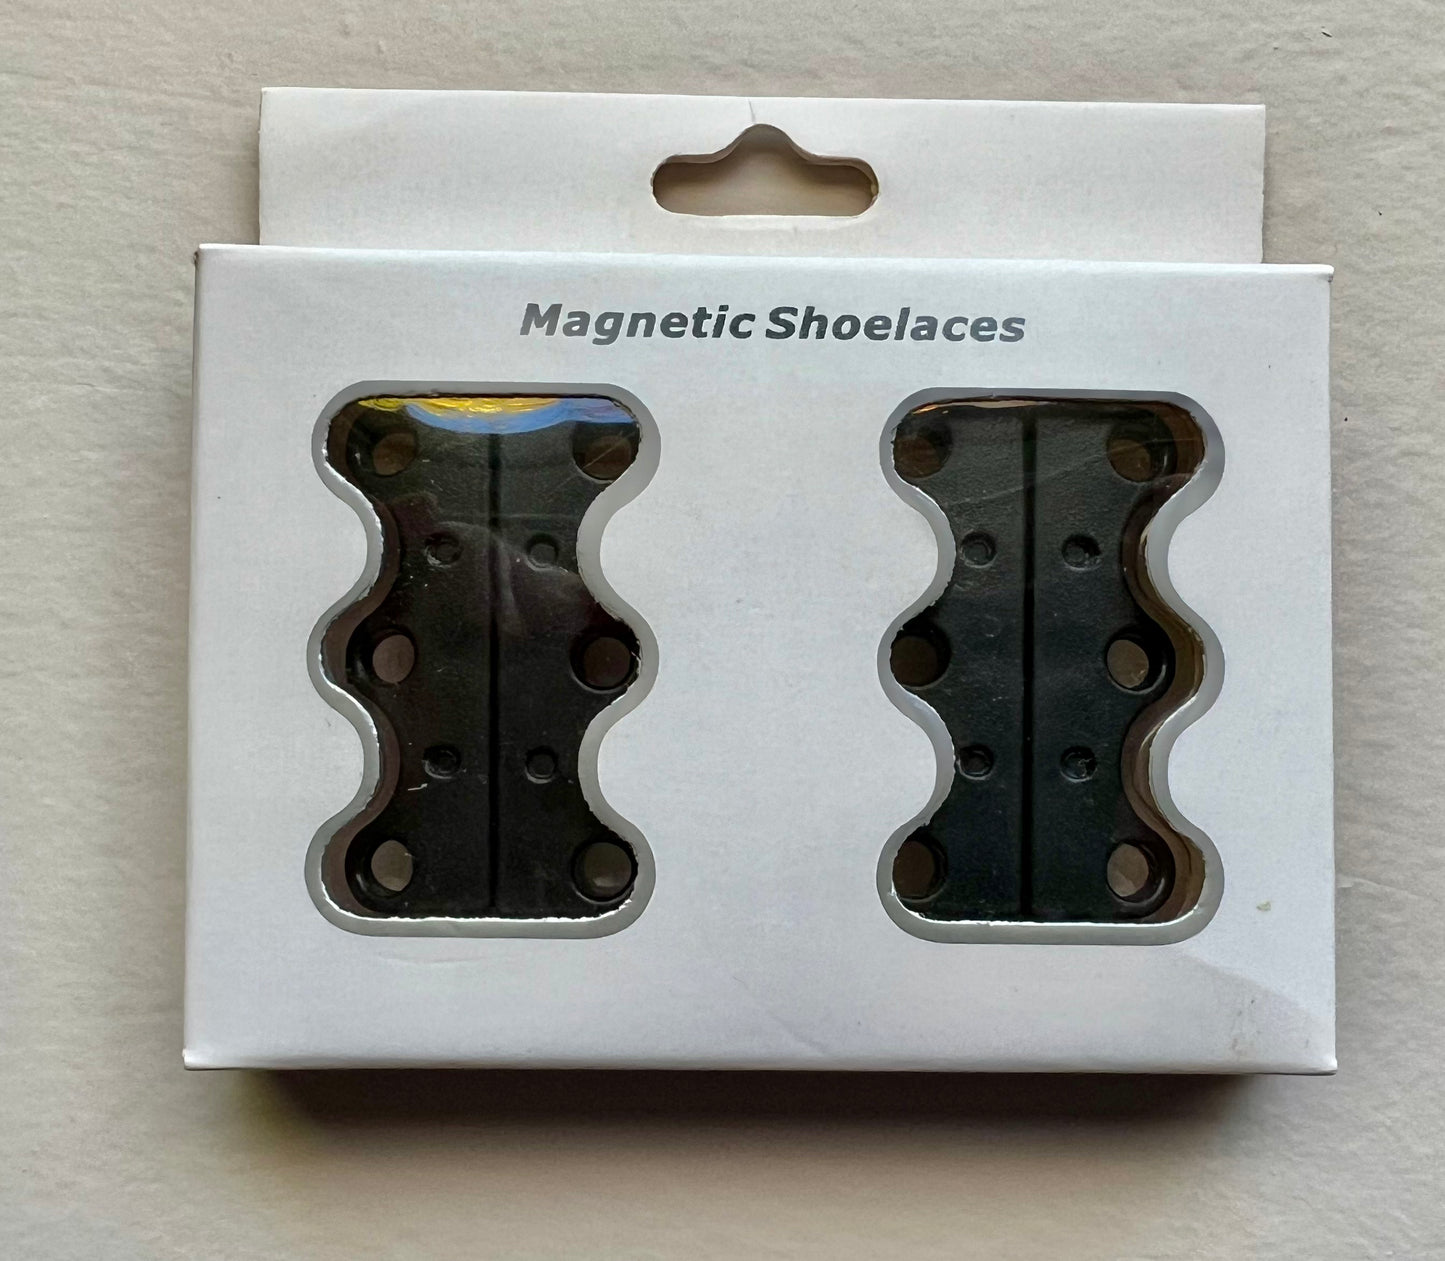 Magnetic Snap Handsfree magnetic shoelaces